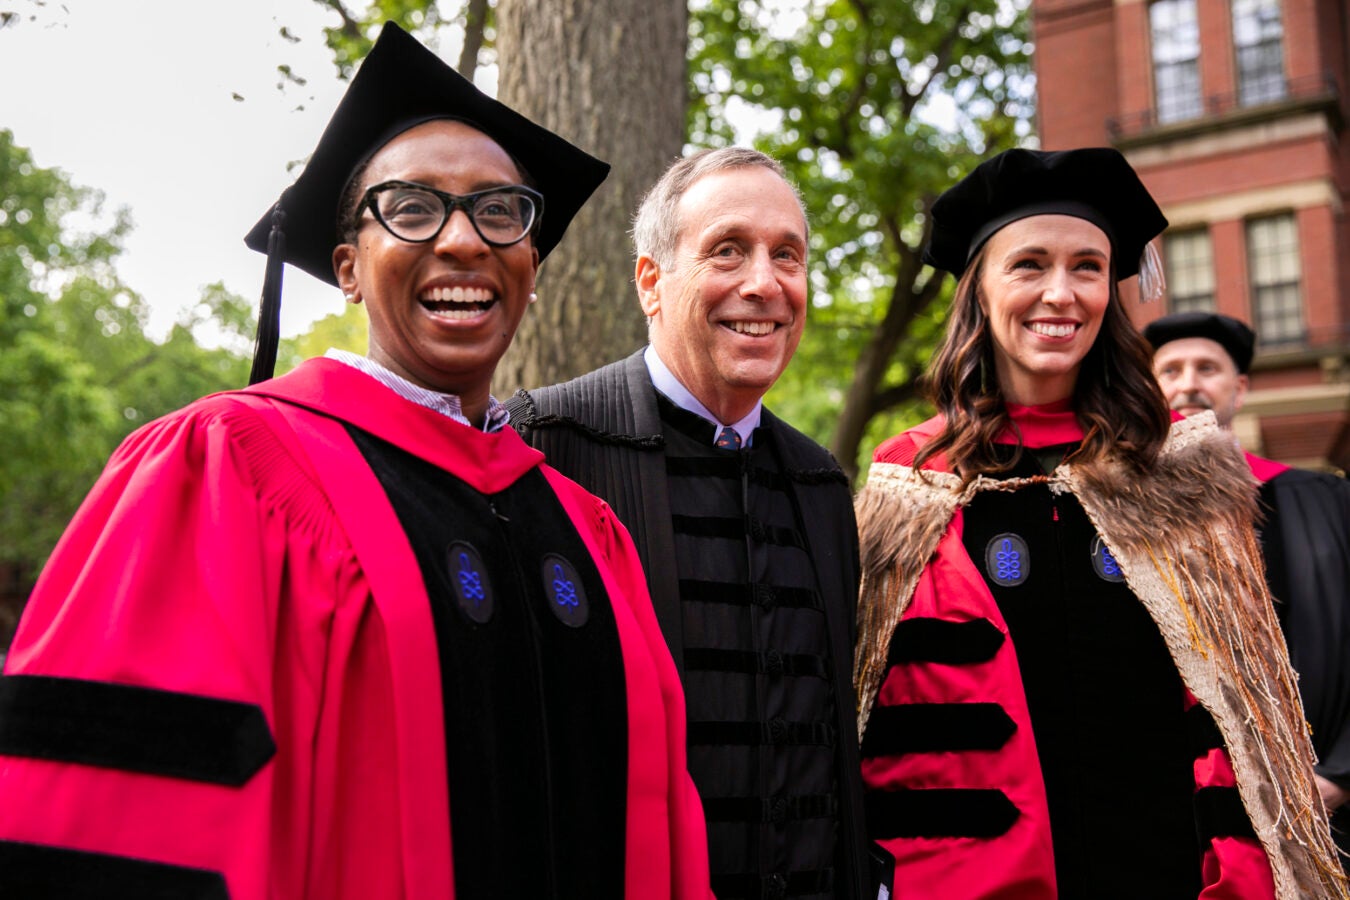 Dean of Faculty of Arts and Sciences and incoming president Claudine Gay (from left), Bacow, and Prime Minister of New Zealand Jacinda Ardern, the 2022 Commencement speaker are pictured together.